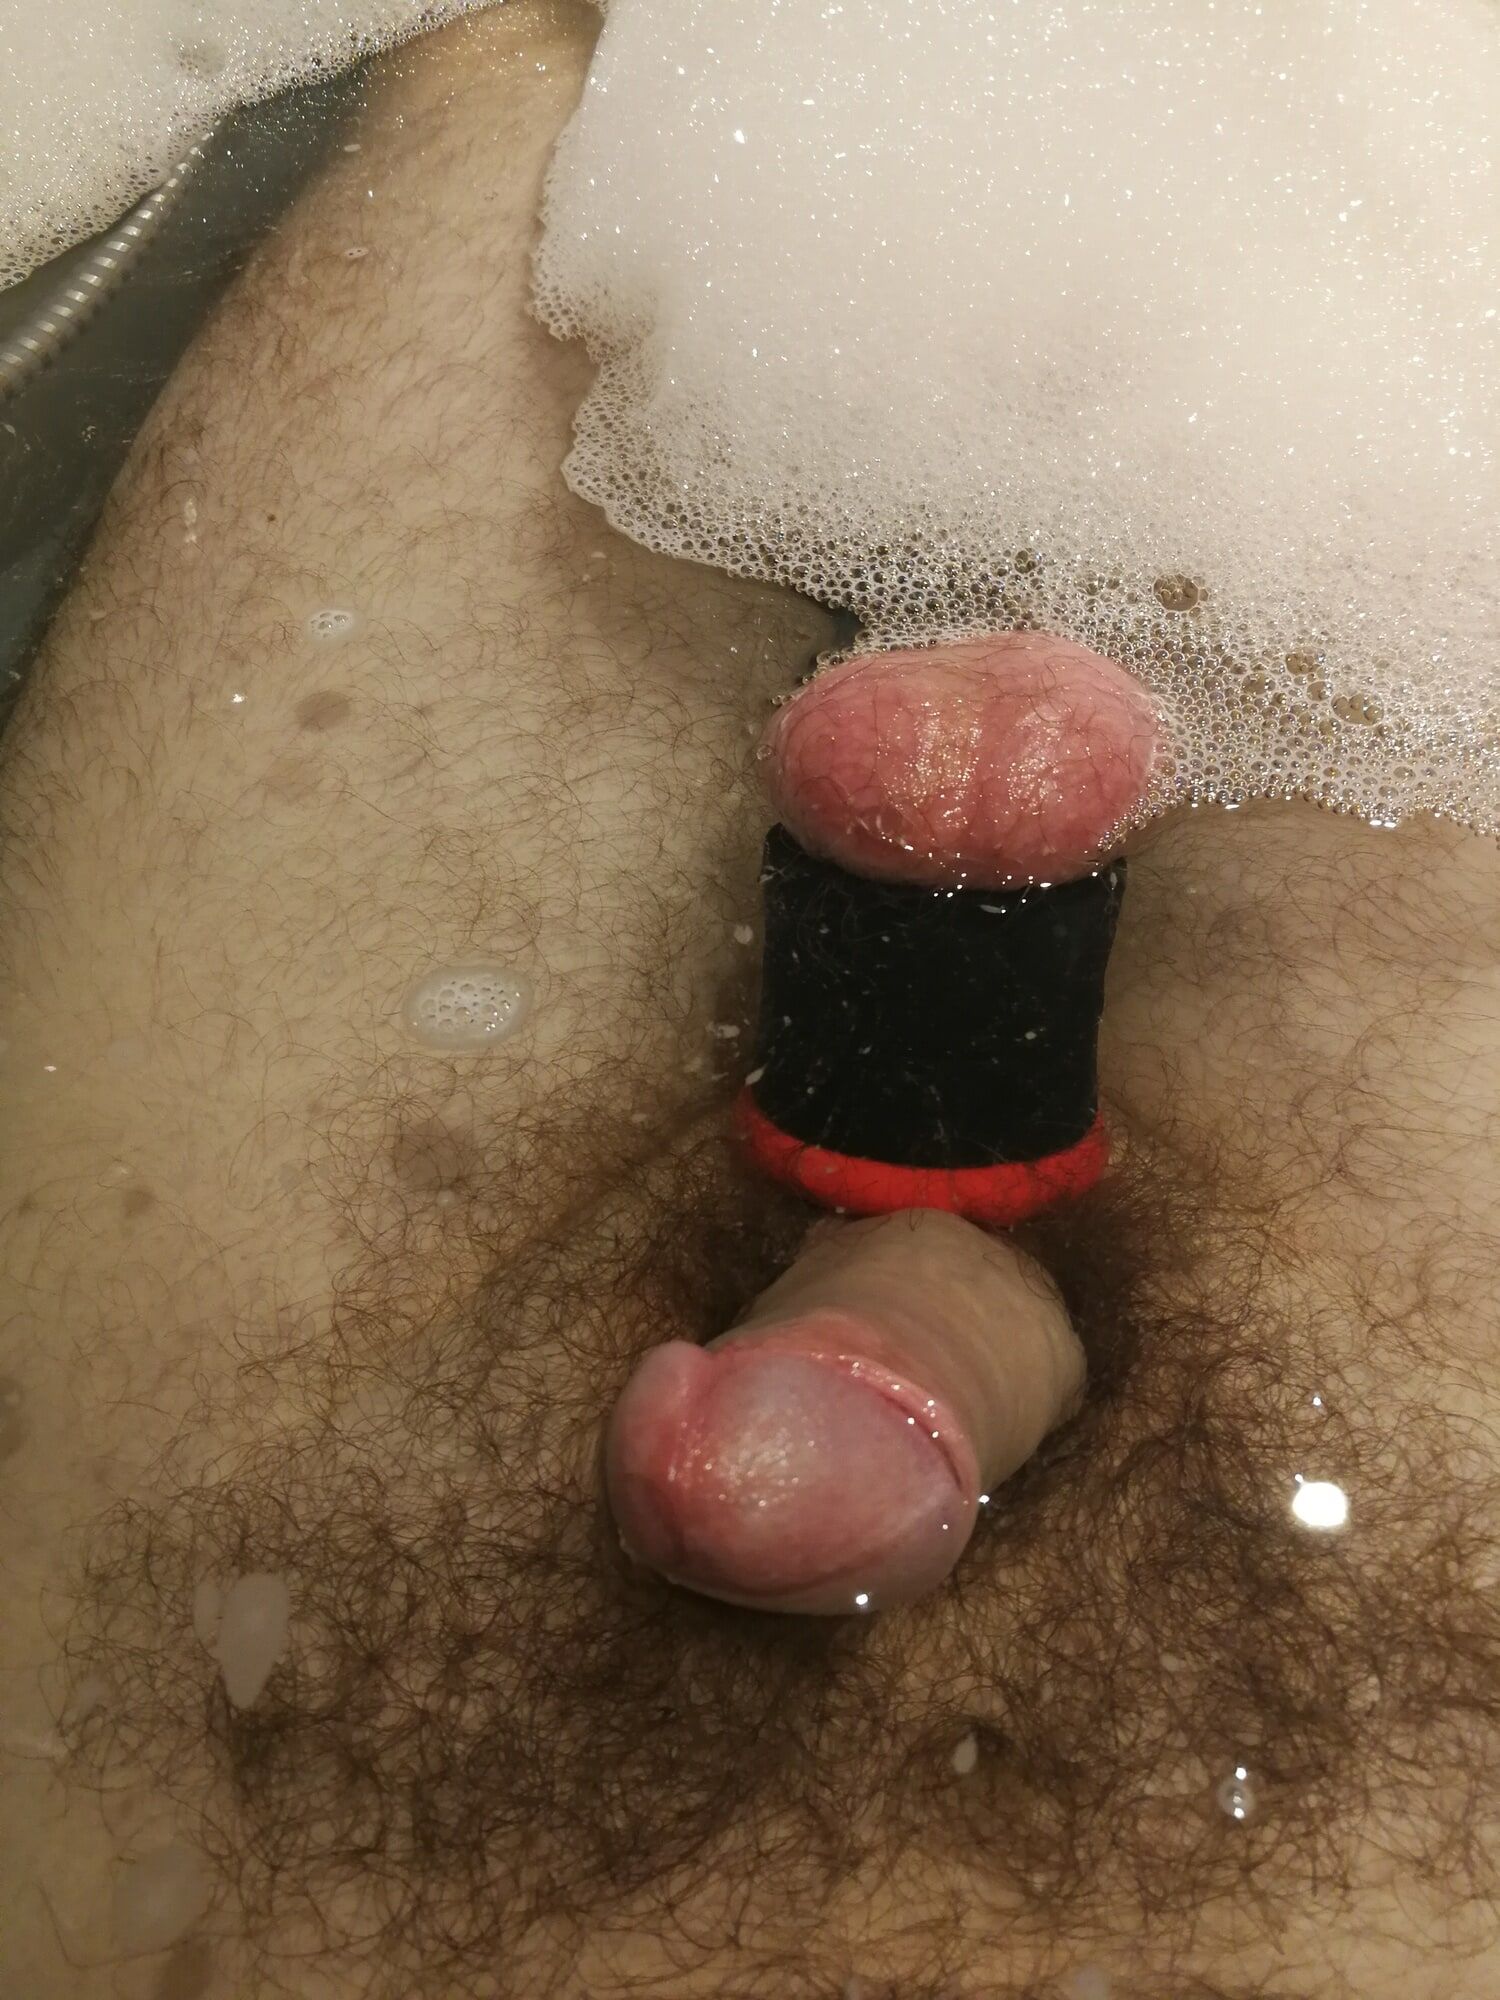 My cock #7